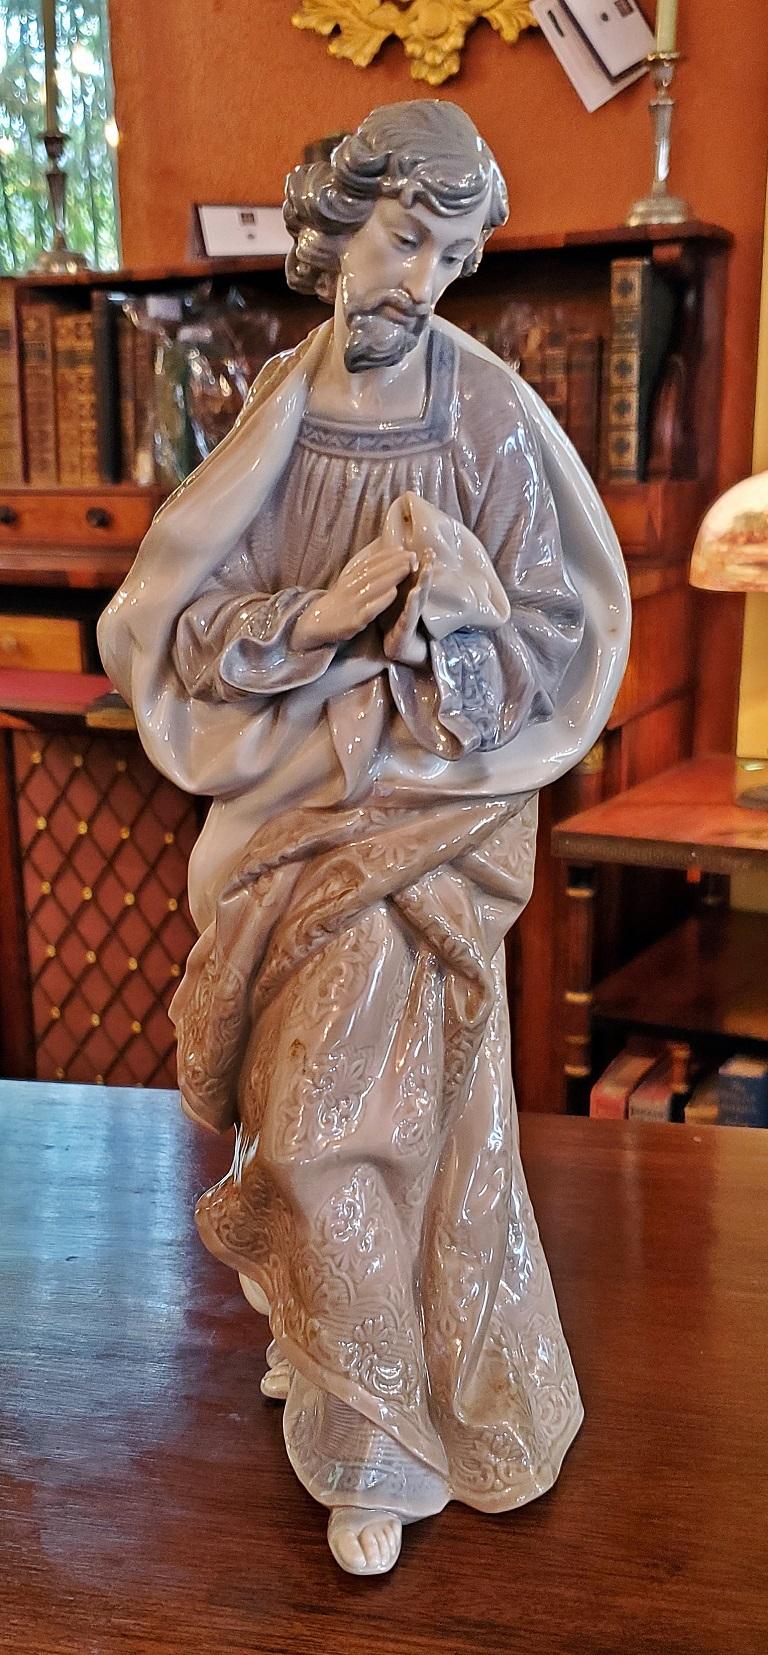 Presenting a gorgeous retired Lladro St Joseph ‘San Jose Nacimiento’ figurine in MINT condition.

This figurine was sculpted by Salvador Furio, one of the very best Lladro sculptors. They were made in limited numbers between 1981 and in 2007, when